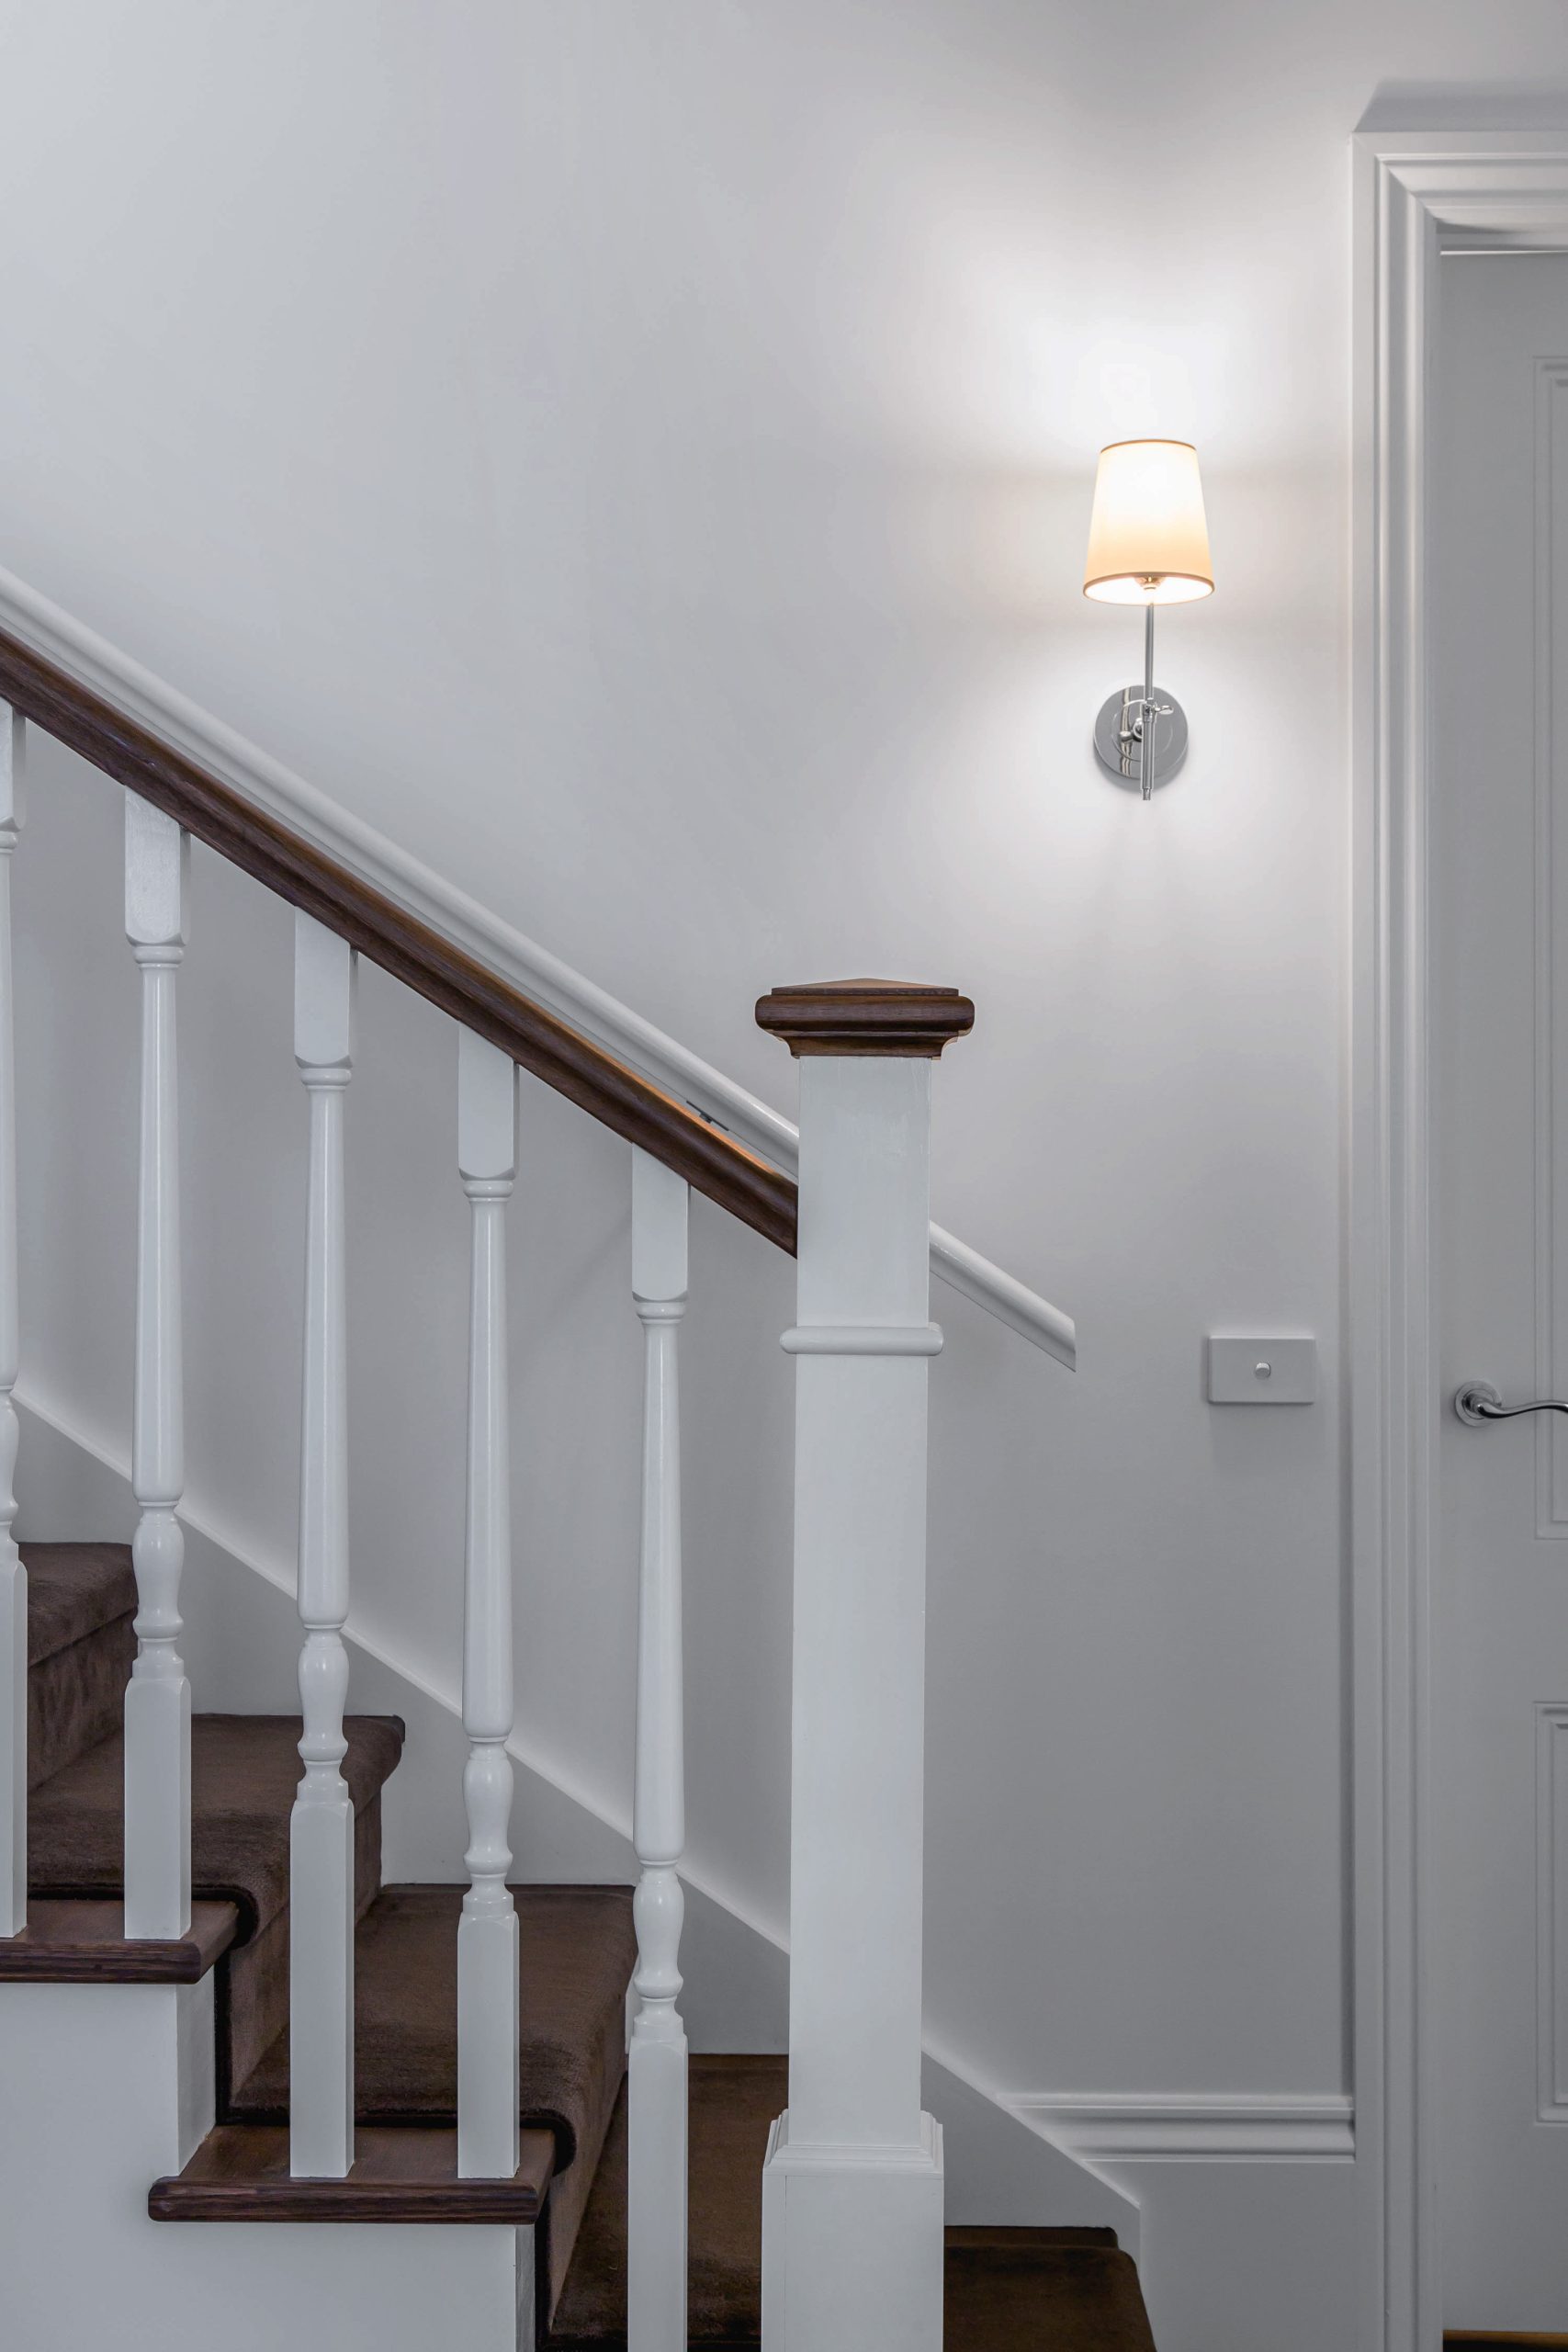 Wall lights in staircase.